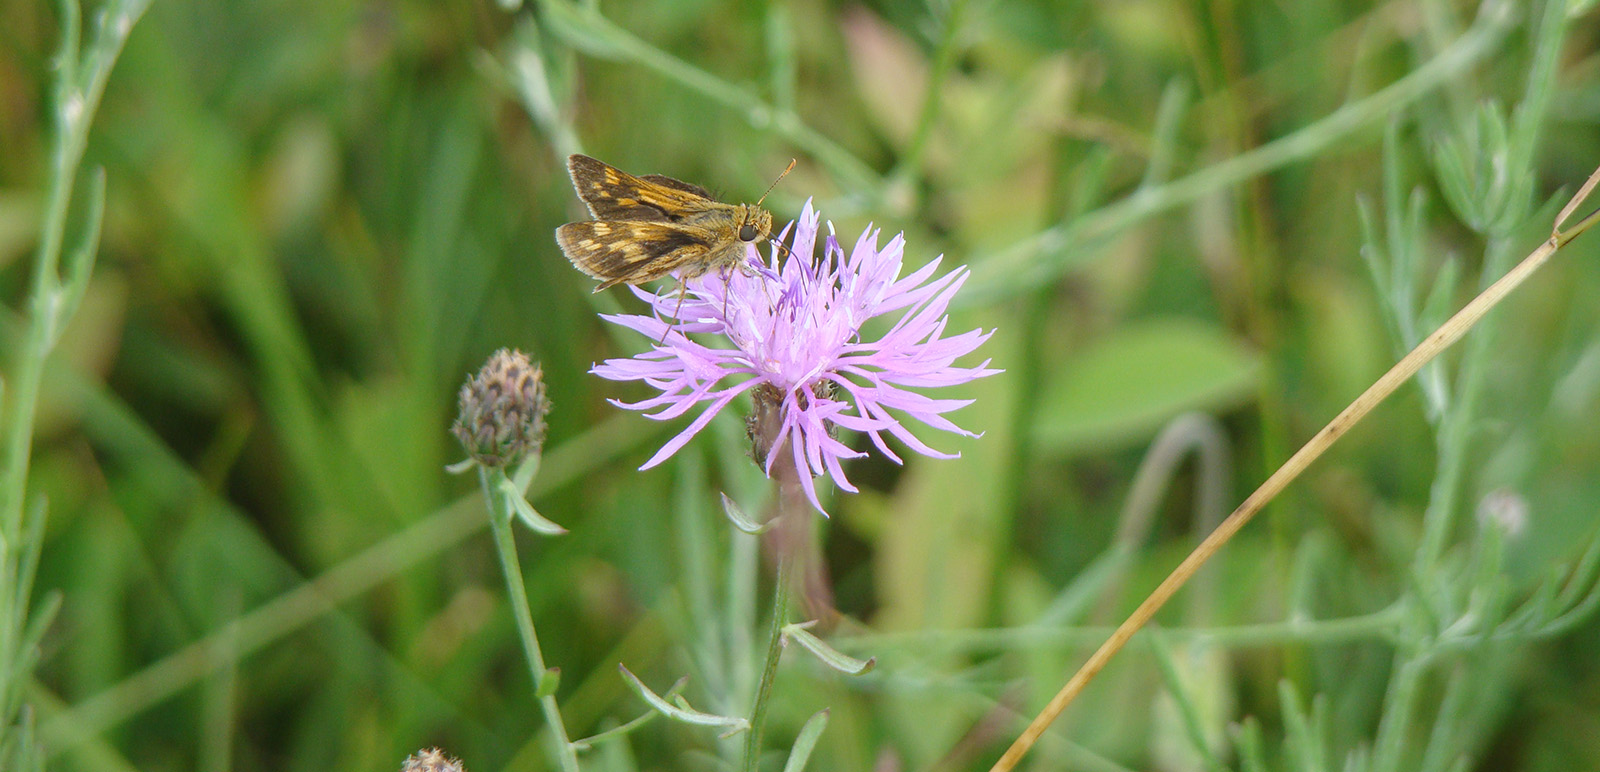 A photo of a small butterfly sitting on a purple thistle flower.